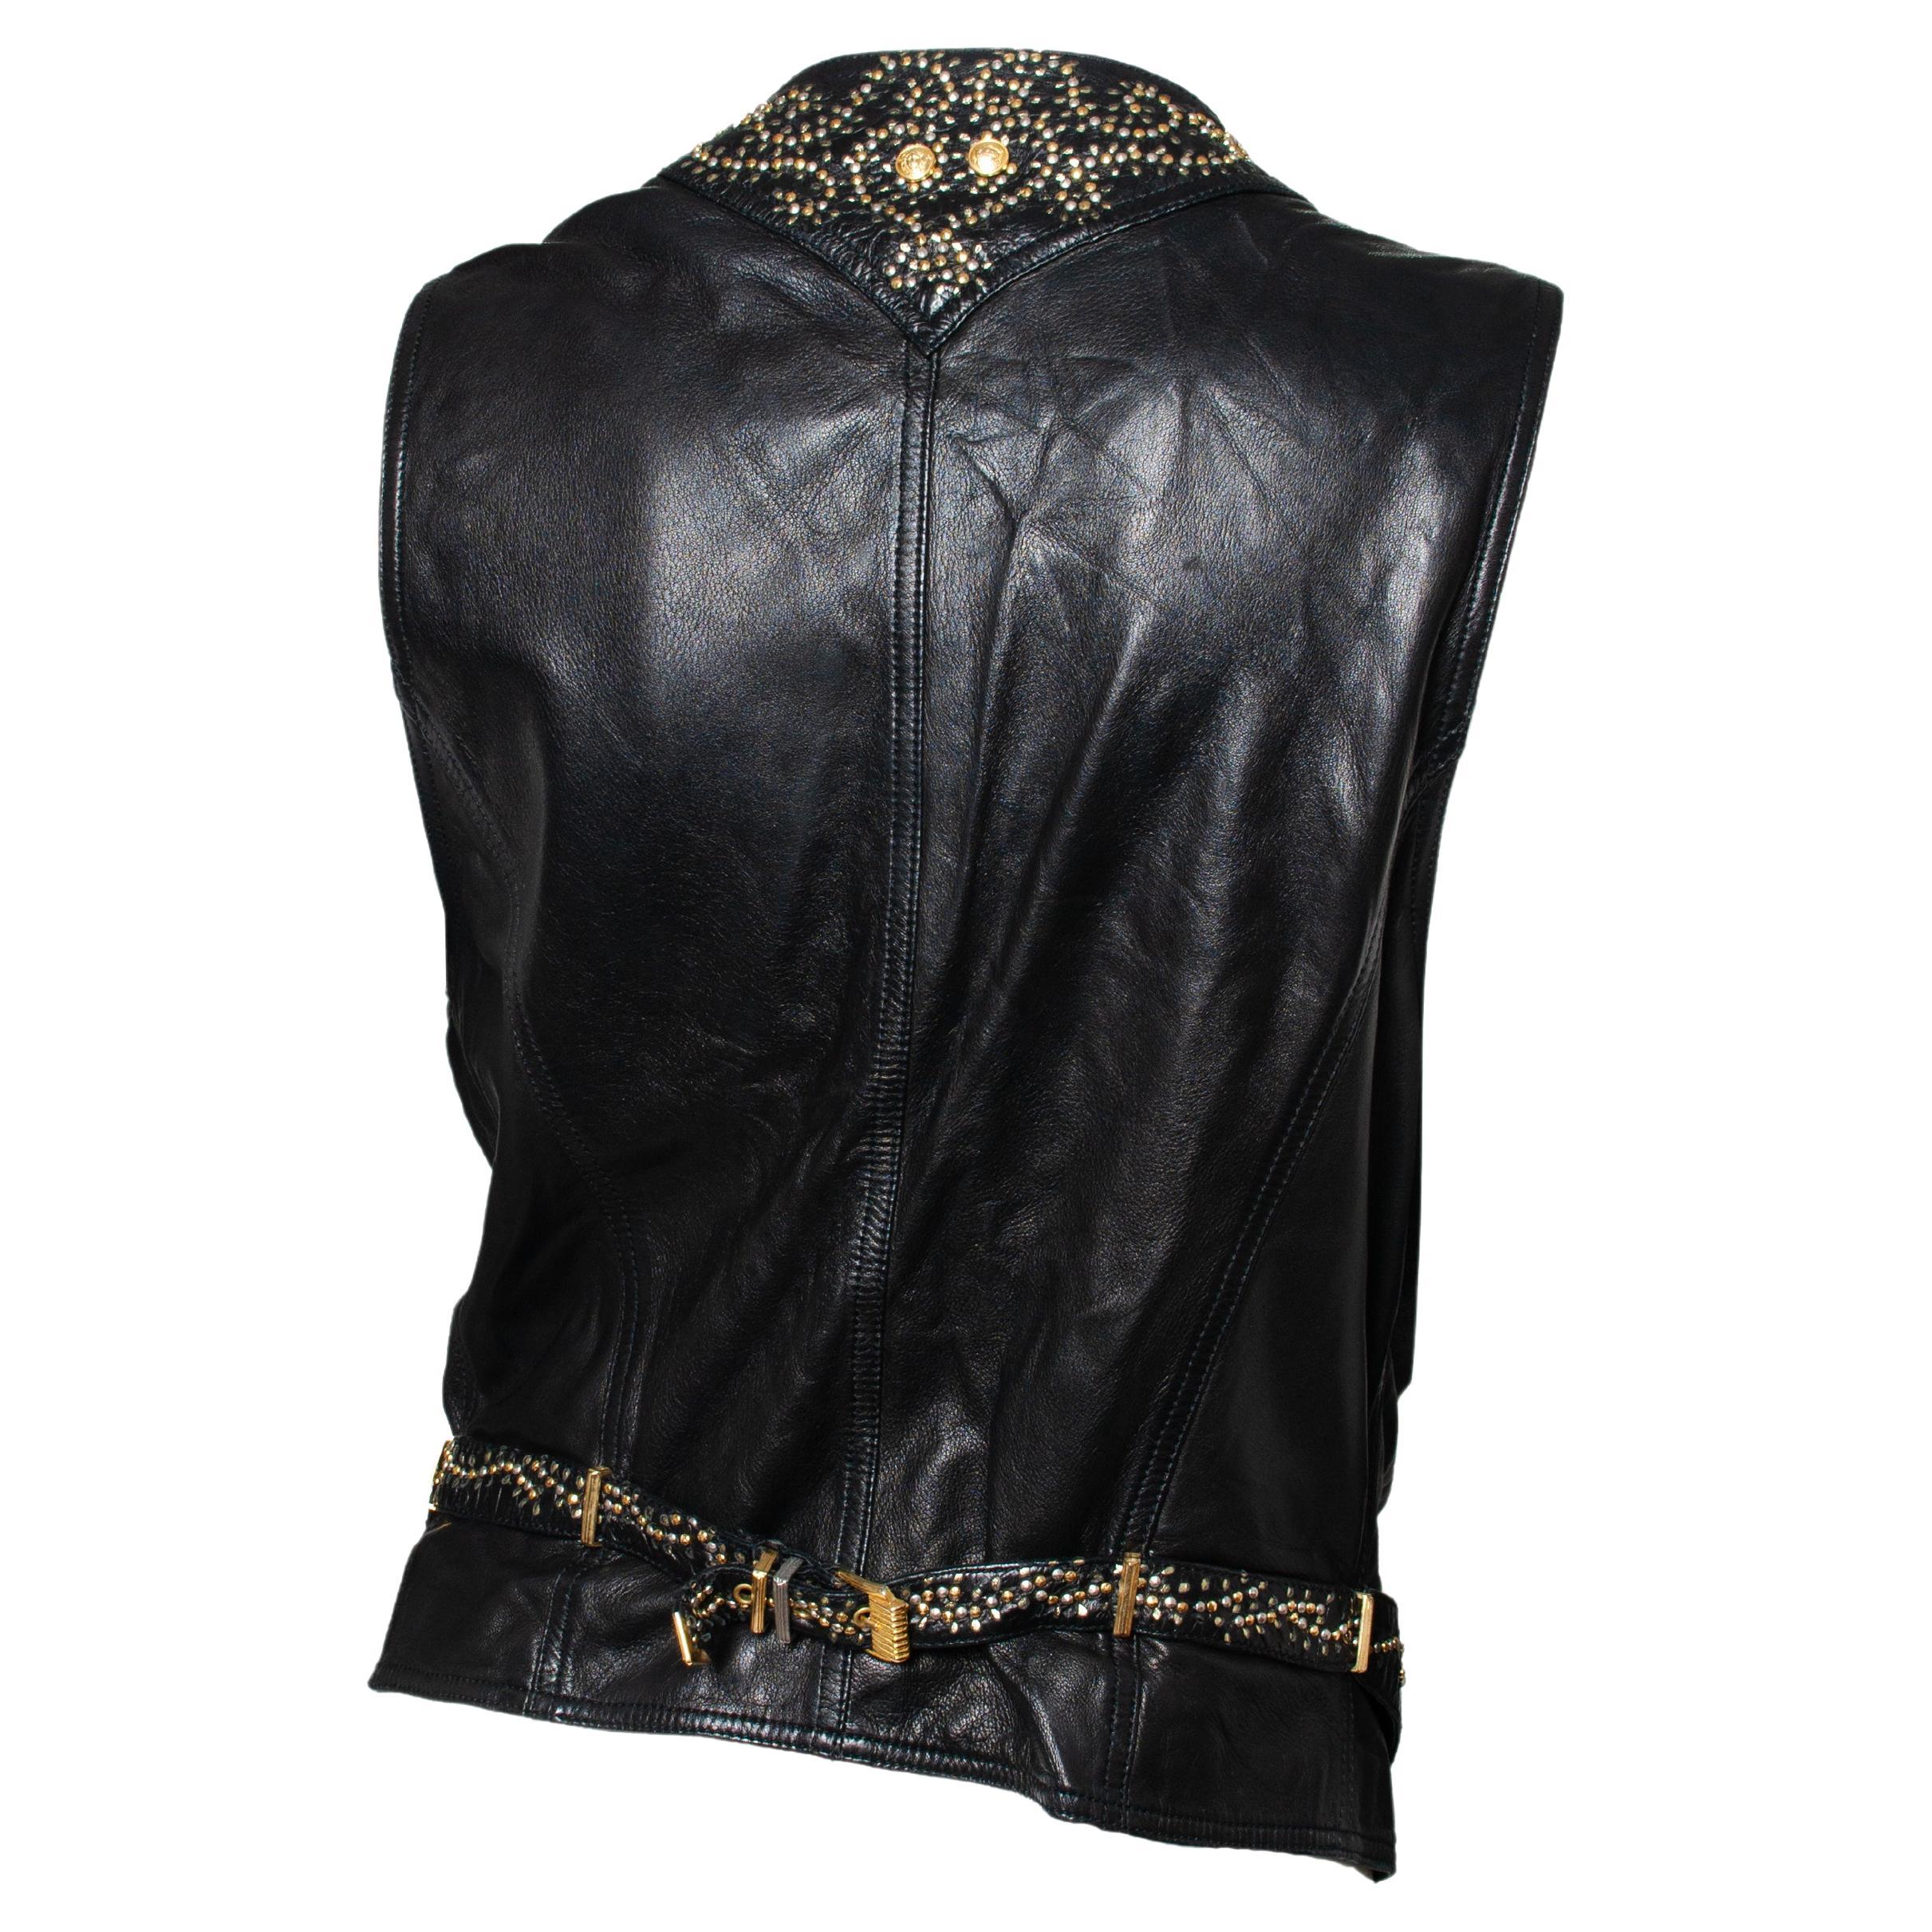 From the Fall/Winter 1992 'Miss S&M' bondage collection, this leather vest features gold and silver studs arranged in a beautiful spiral pattern. This vest has two pockets at the breasts with studs and gold Medusas. The back is adorned with